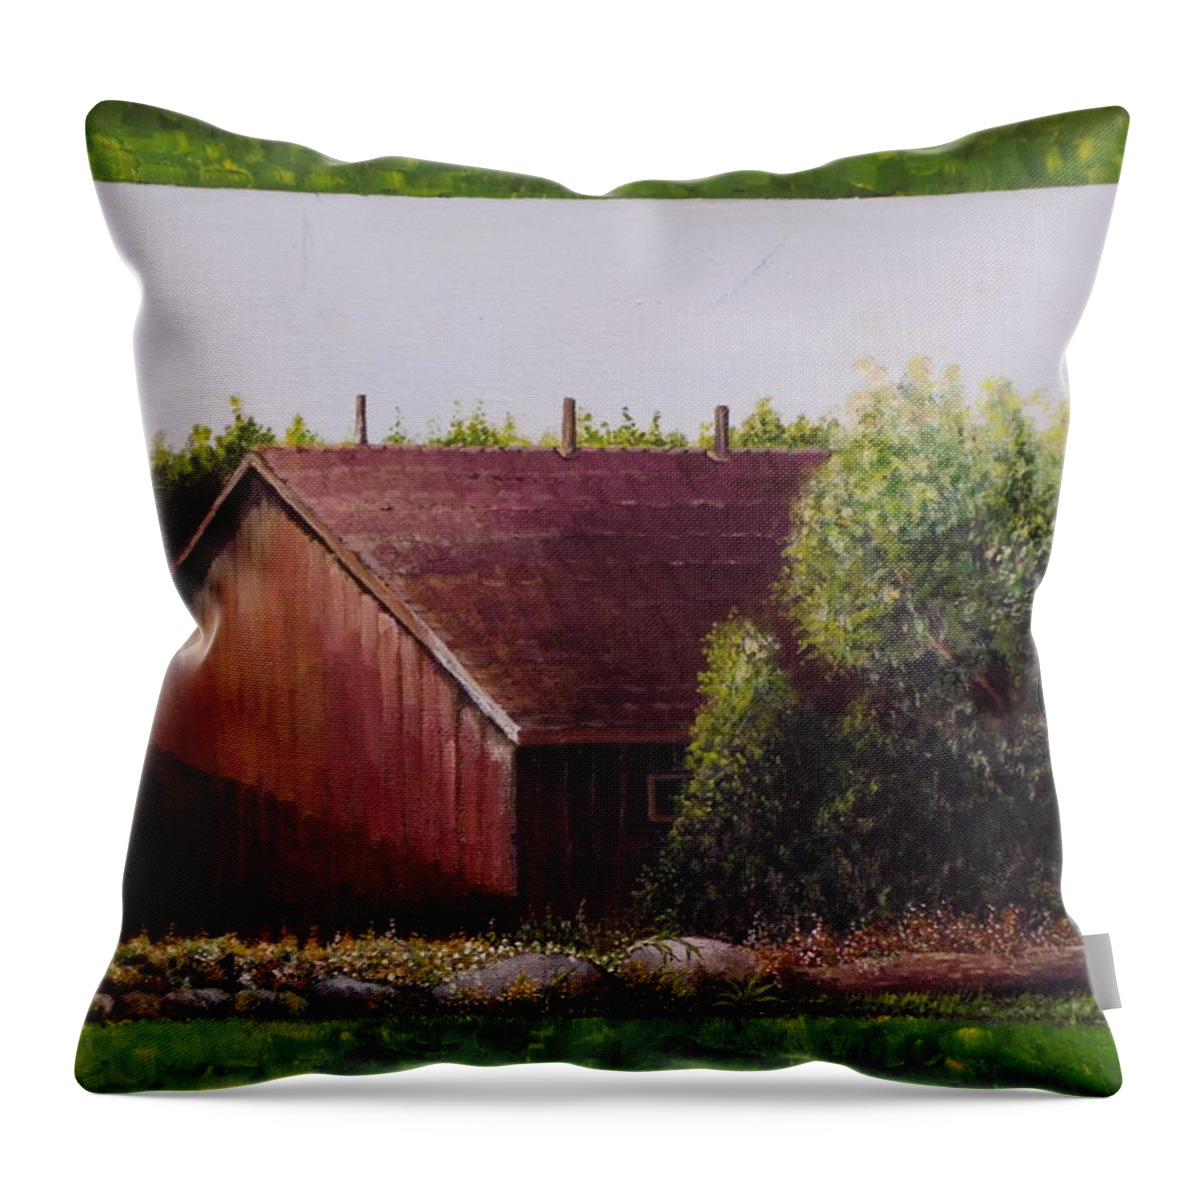 An Old Barn In The Fields That Is Overgrown With Large Bushes. Next To The Barn Are Several Types Of Wild Flowers. Throw Pillow featuring the painting Overgrown Barn by Martin Schmidt